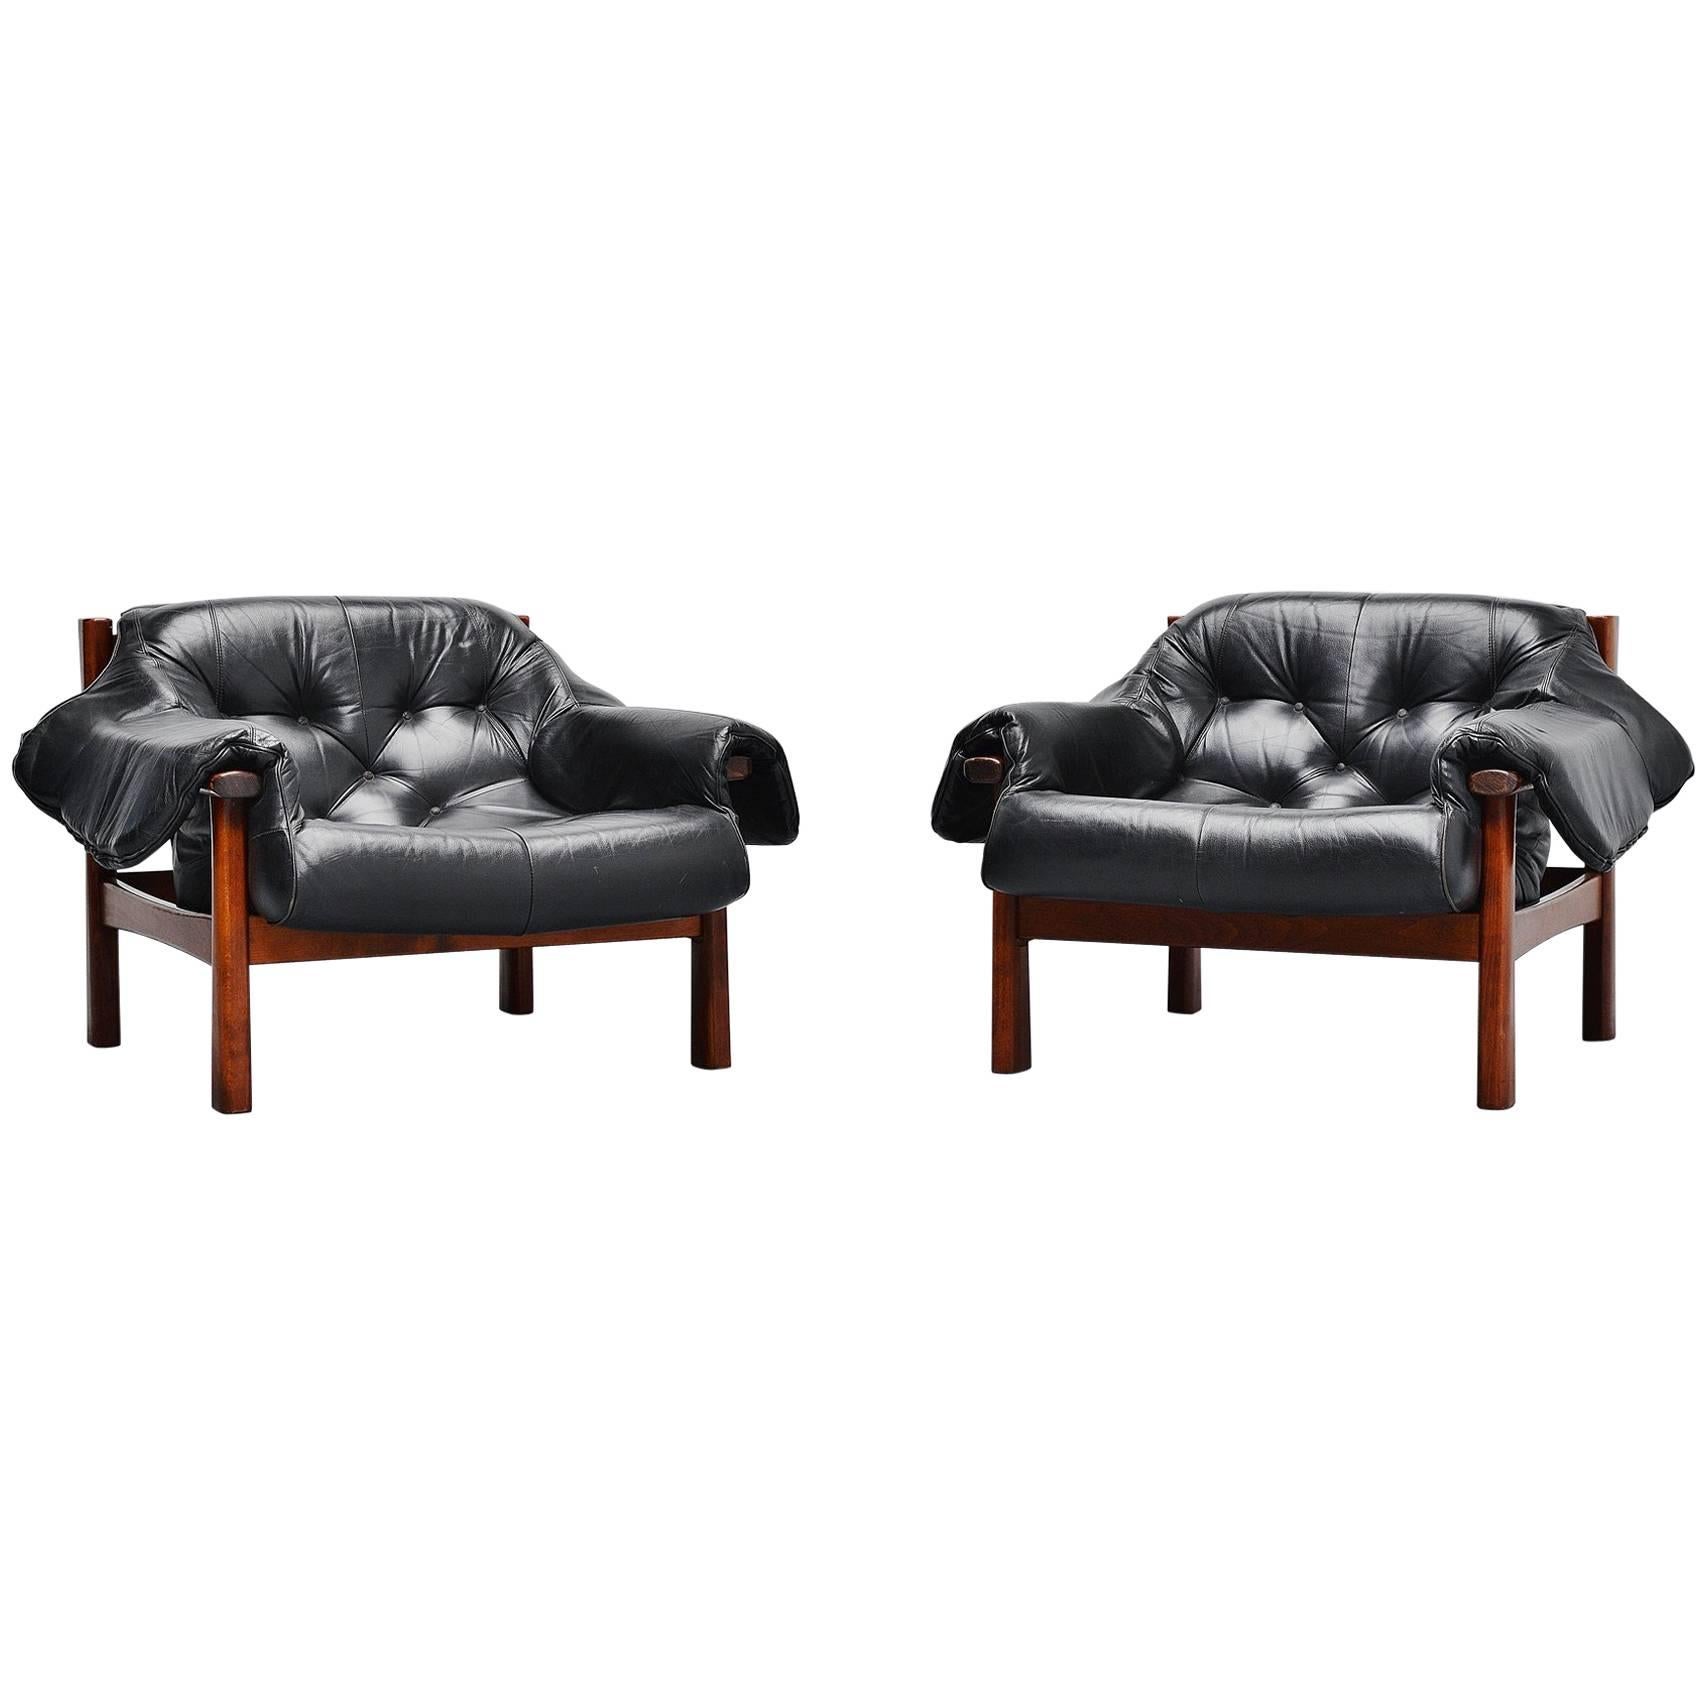 Pair of Percival Lafer Lounge Chairs, Brazil, 1960